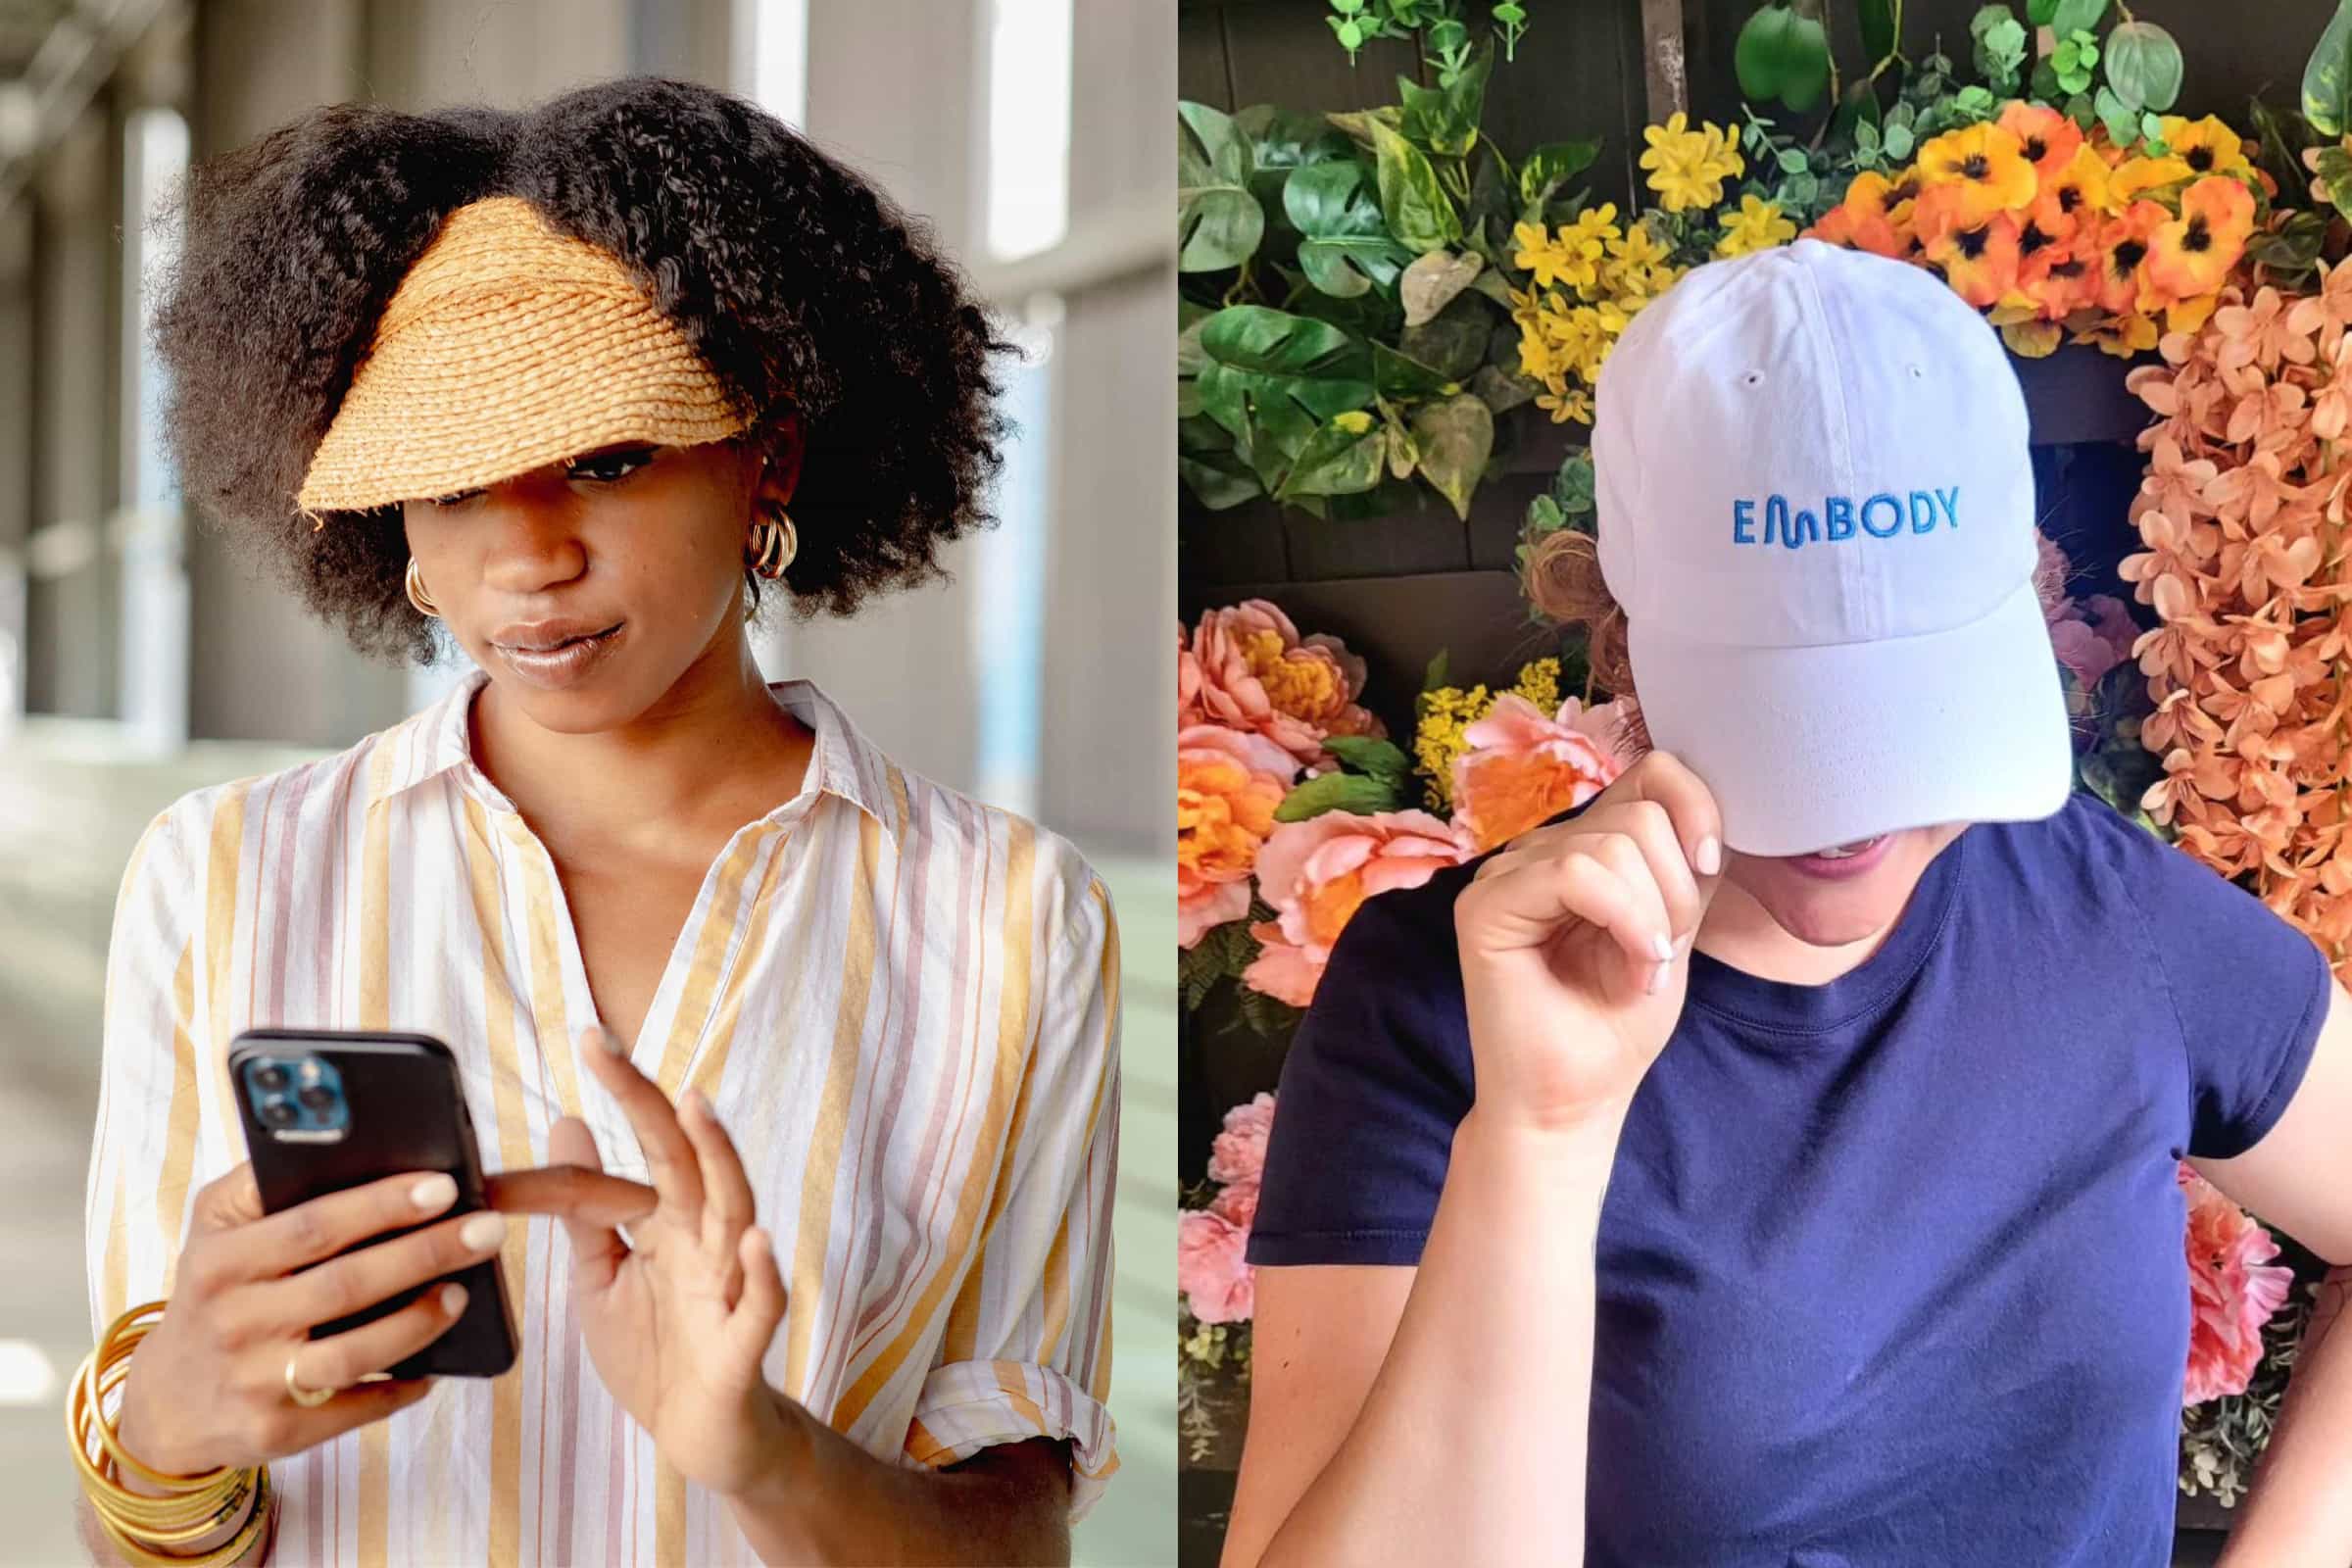 Image of two Embody users, one with a phone and one wearing an Embody hat